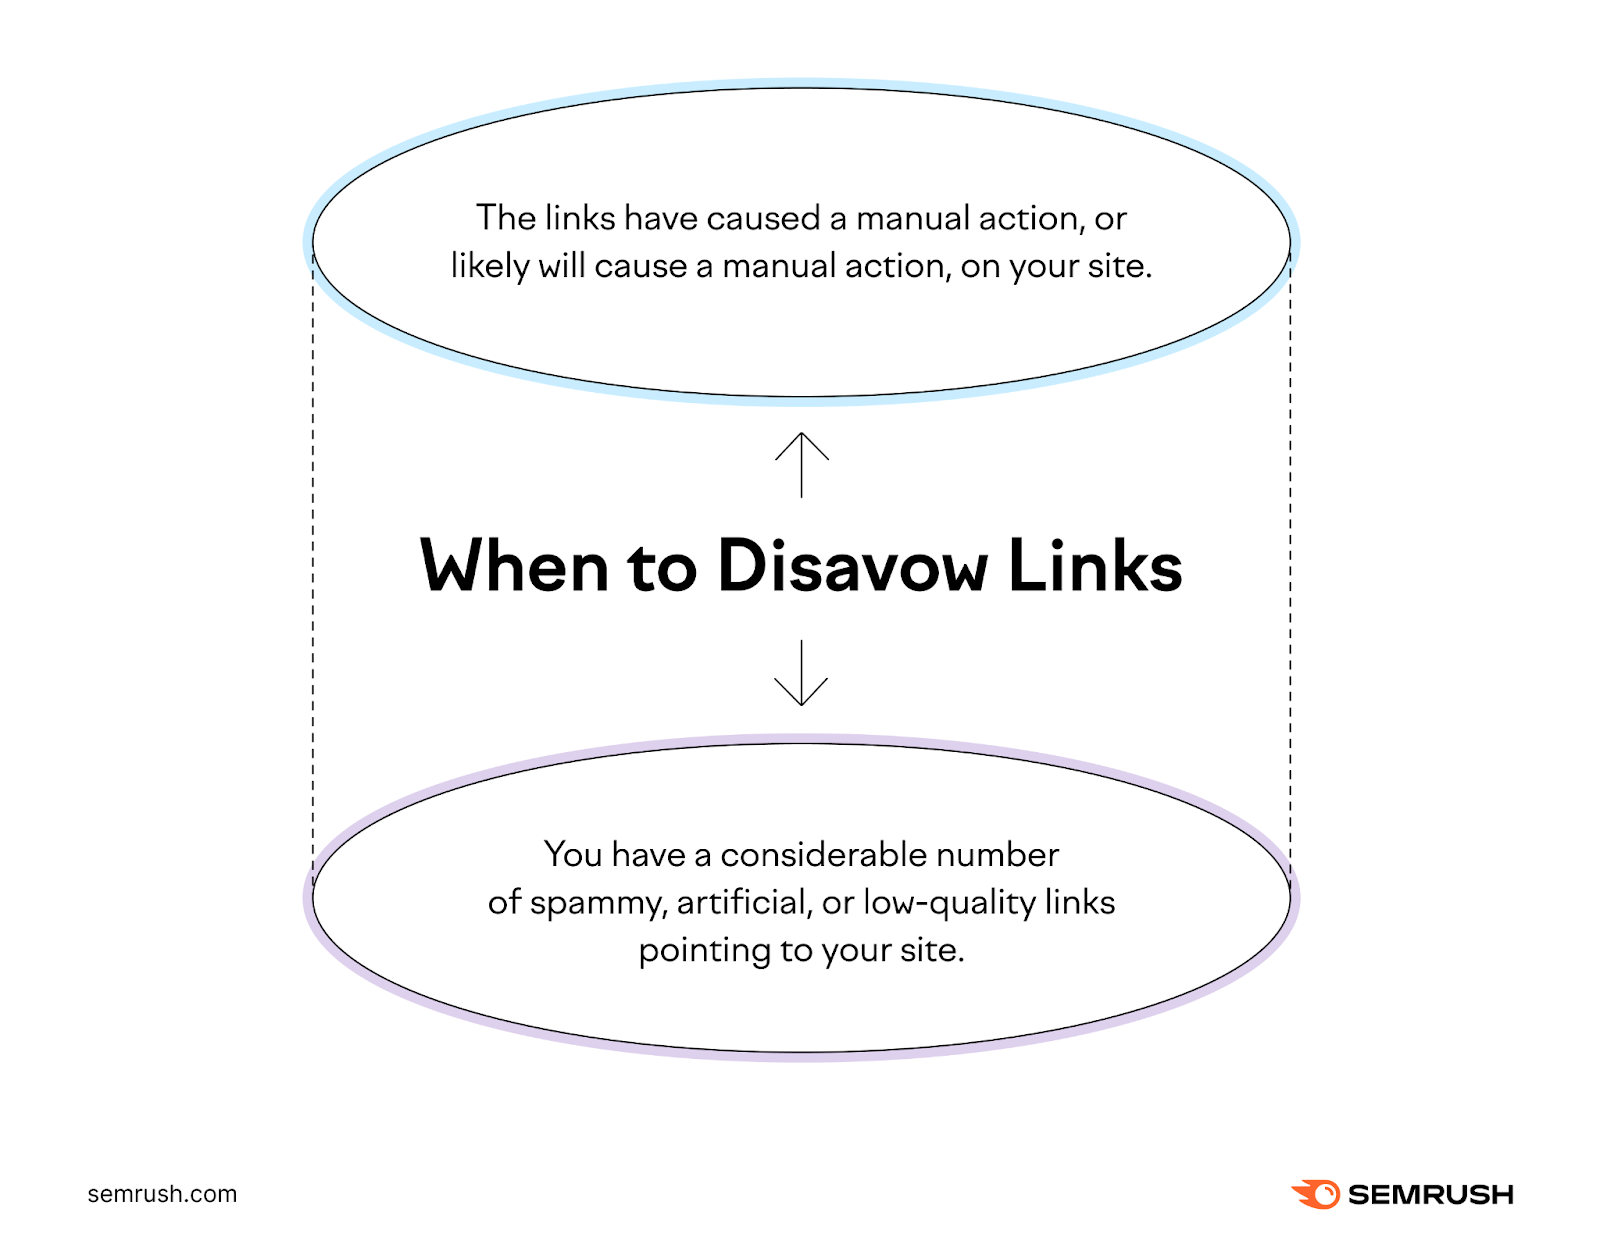 When to disavow links infographic